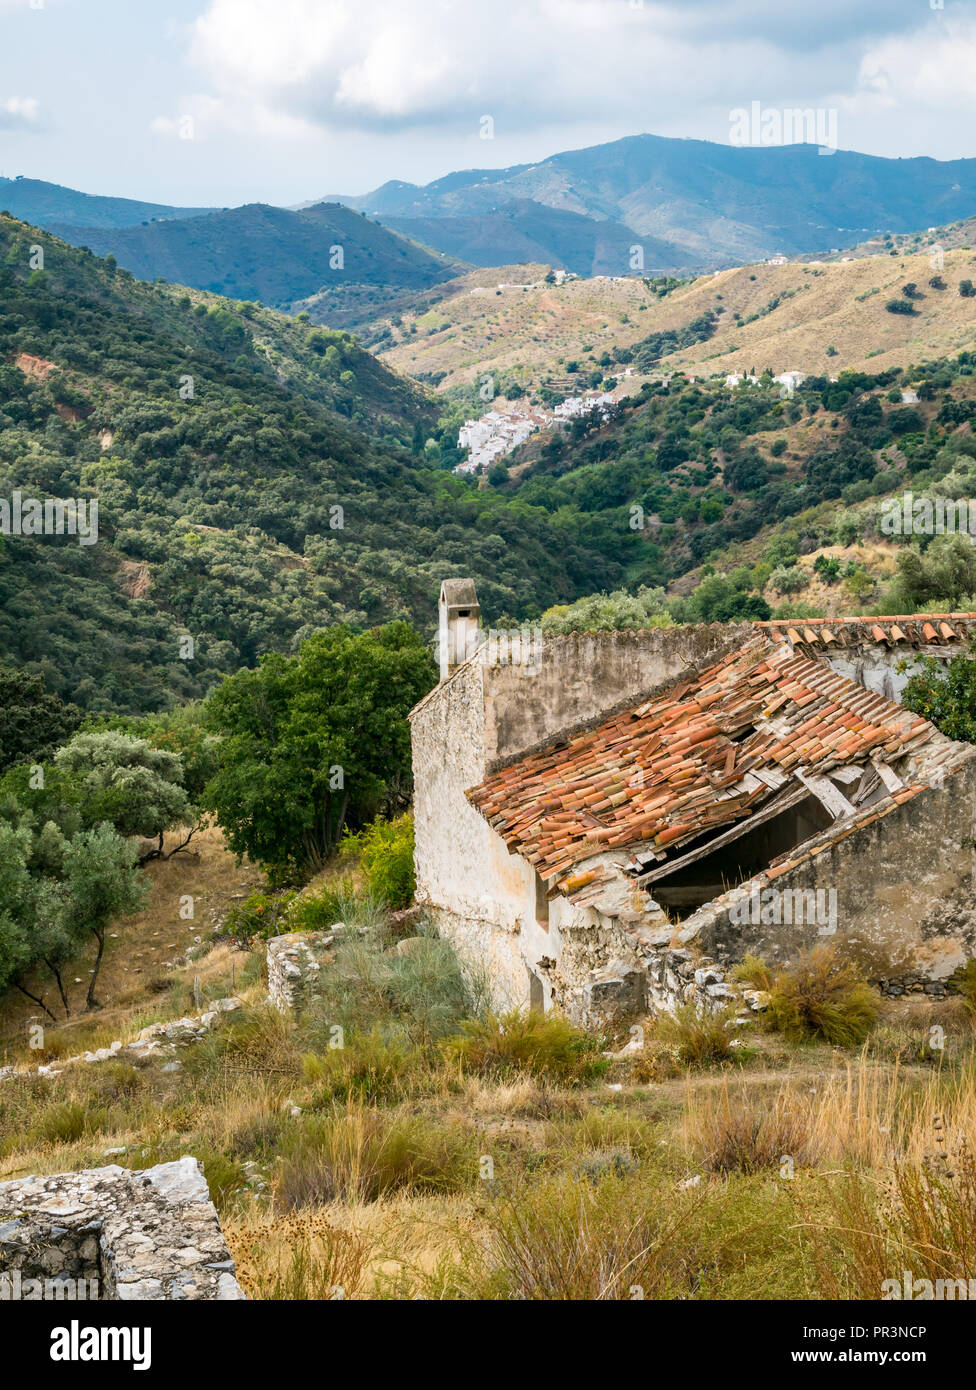 GR mountain walking route 249 view valley and ruined buildings, Sierras de  Tejeda Natural Park, Salares, Axarquia, Andalucia, Spain Stock Photo - Alamy